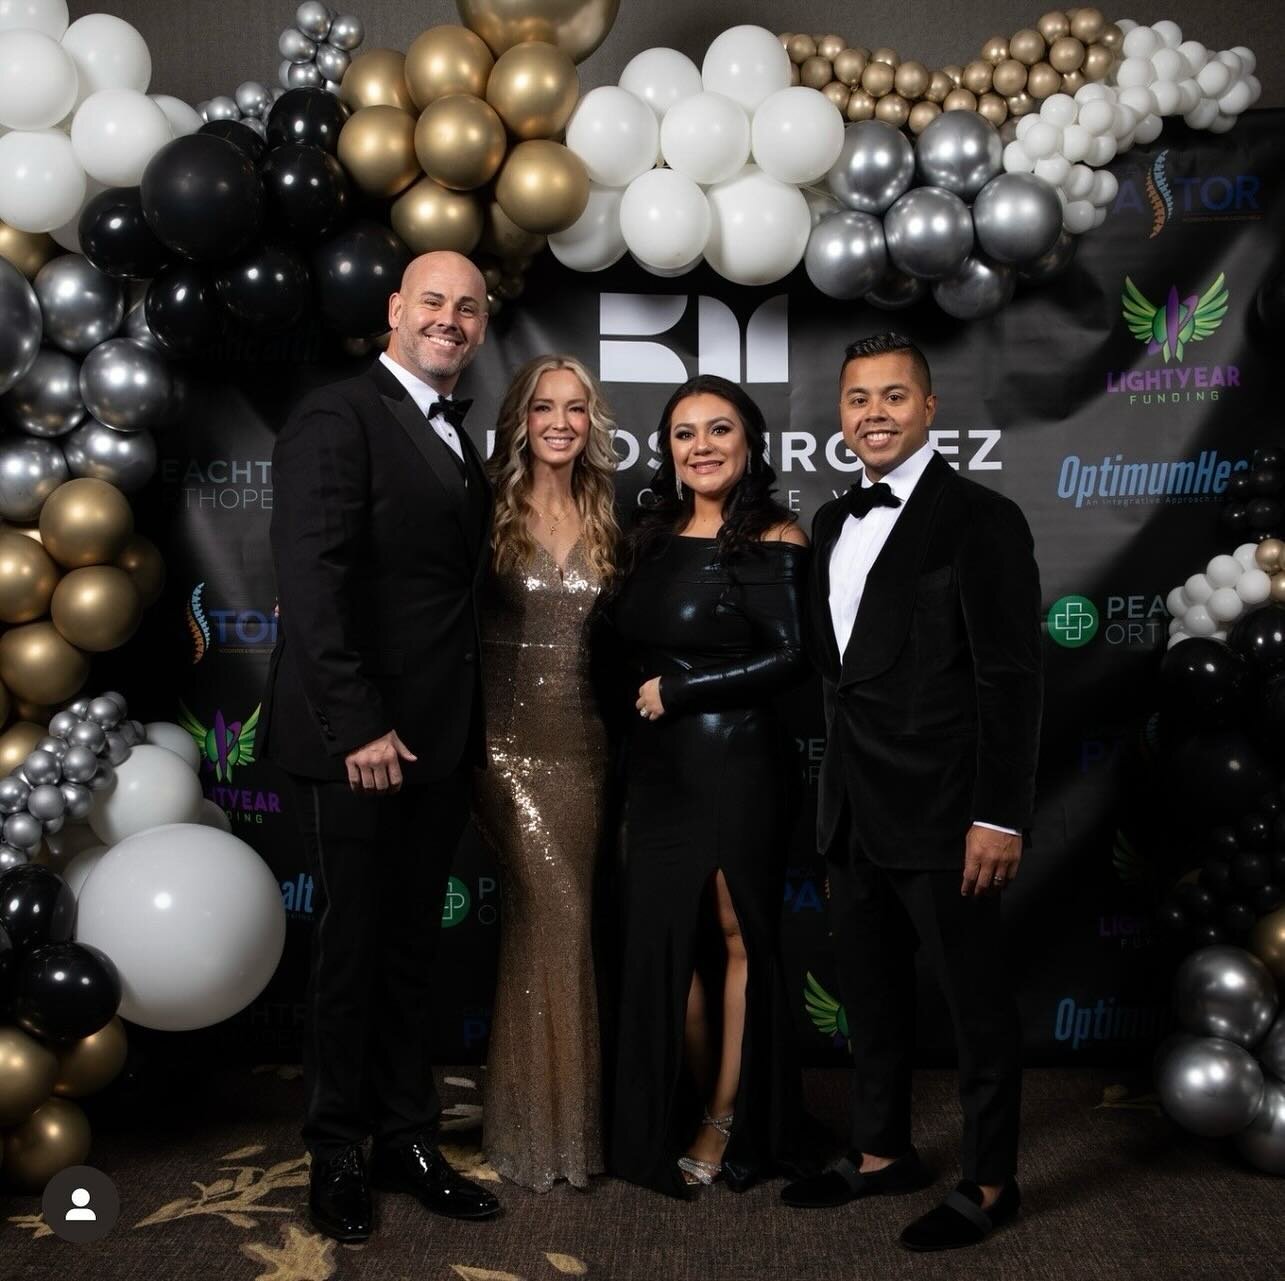 We were very proud Diamond sponsors of @barriosvirguezattorneys 10th Anniversary Gala this Saturday at @gassouthdistrict Congratulations to this power couple who runs their business with such integrity and purpose. True inspirations. 

#lightyear #li